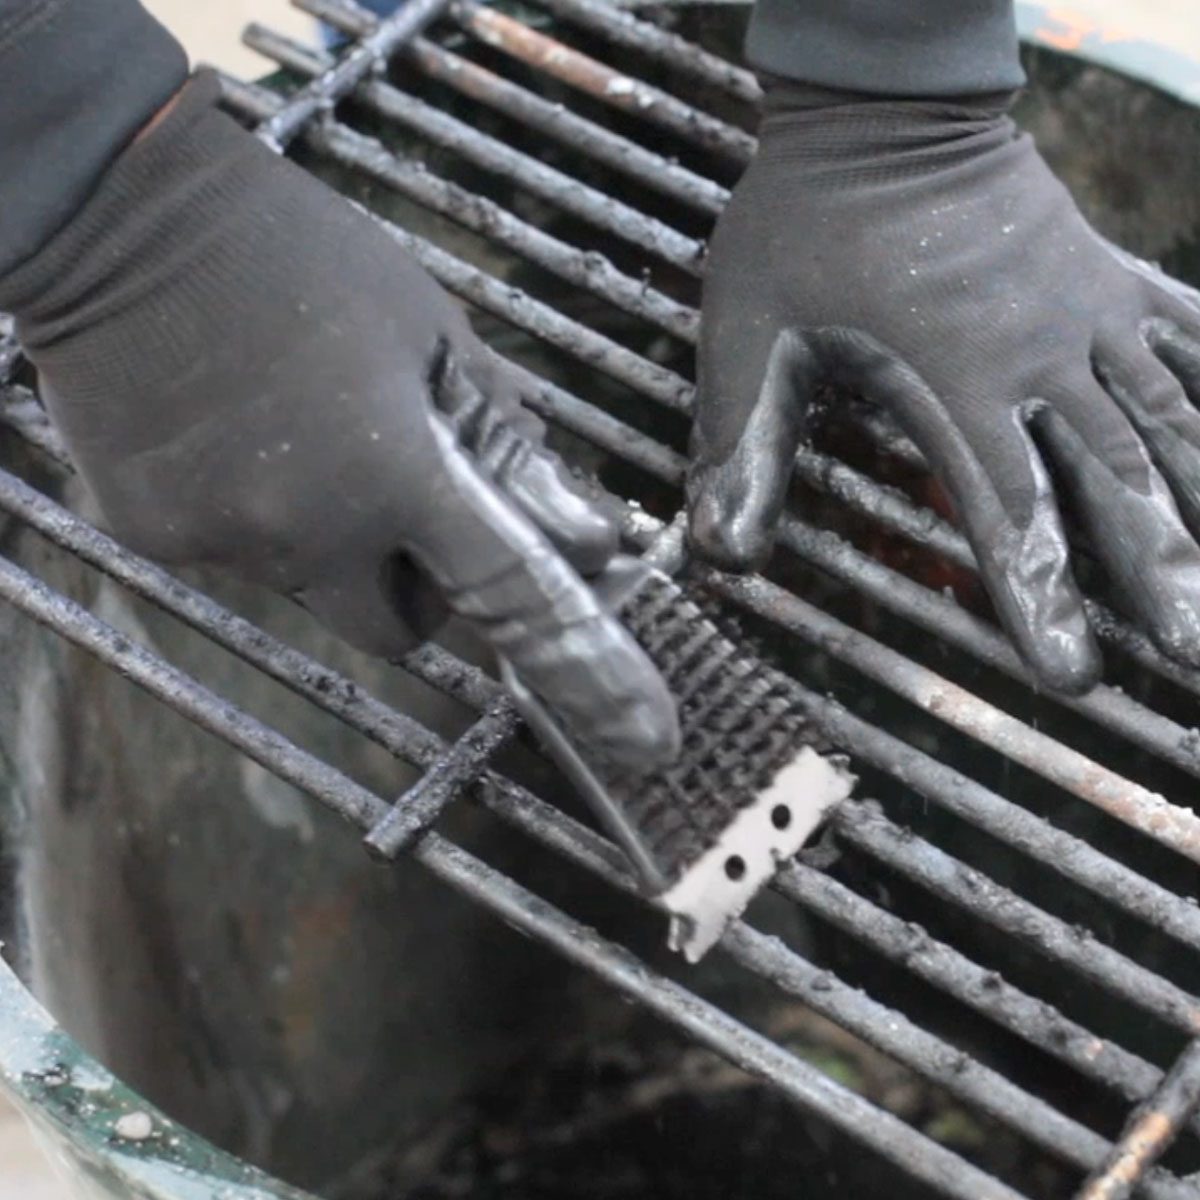 A 3-Step Method for Cleaning Grill Grates When They Really Need It